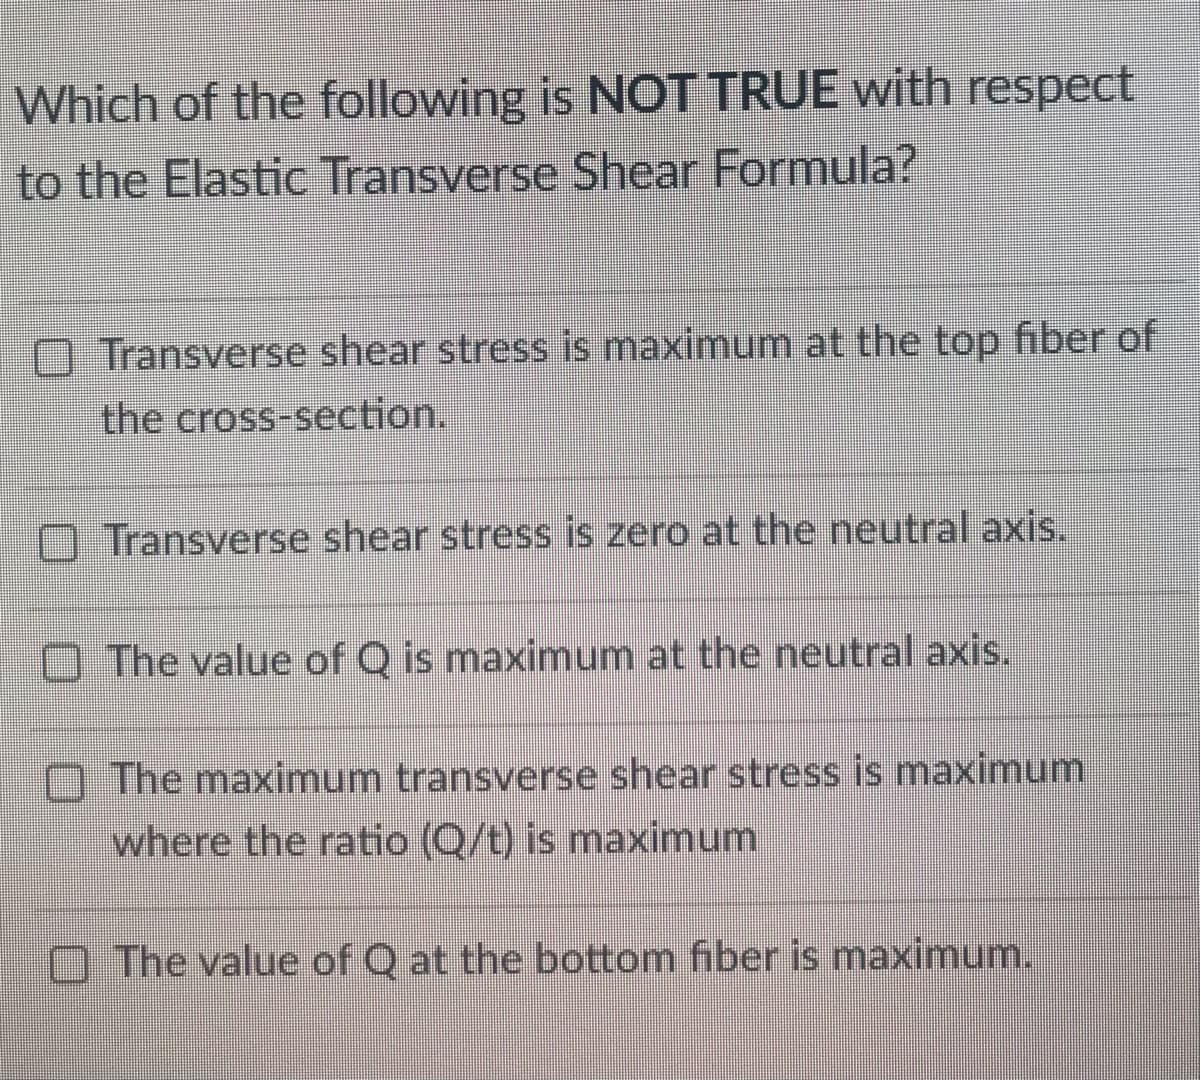 Which of the following is NOT TRUE with respect
to the Elastic Transverse Shear Formula?
Transverse shear stress is maximum at the top fiber of
the cross-section.
Transverse shear stress is zero at the neutral axis.
The value of Q is maximum at the neutral axis.
The maximum transverse shear stress is maximum
where the ratio (Q/t) is maximum
The value of Q at the bottom fiber is maximum.